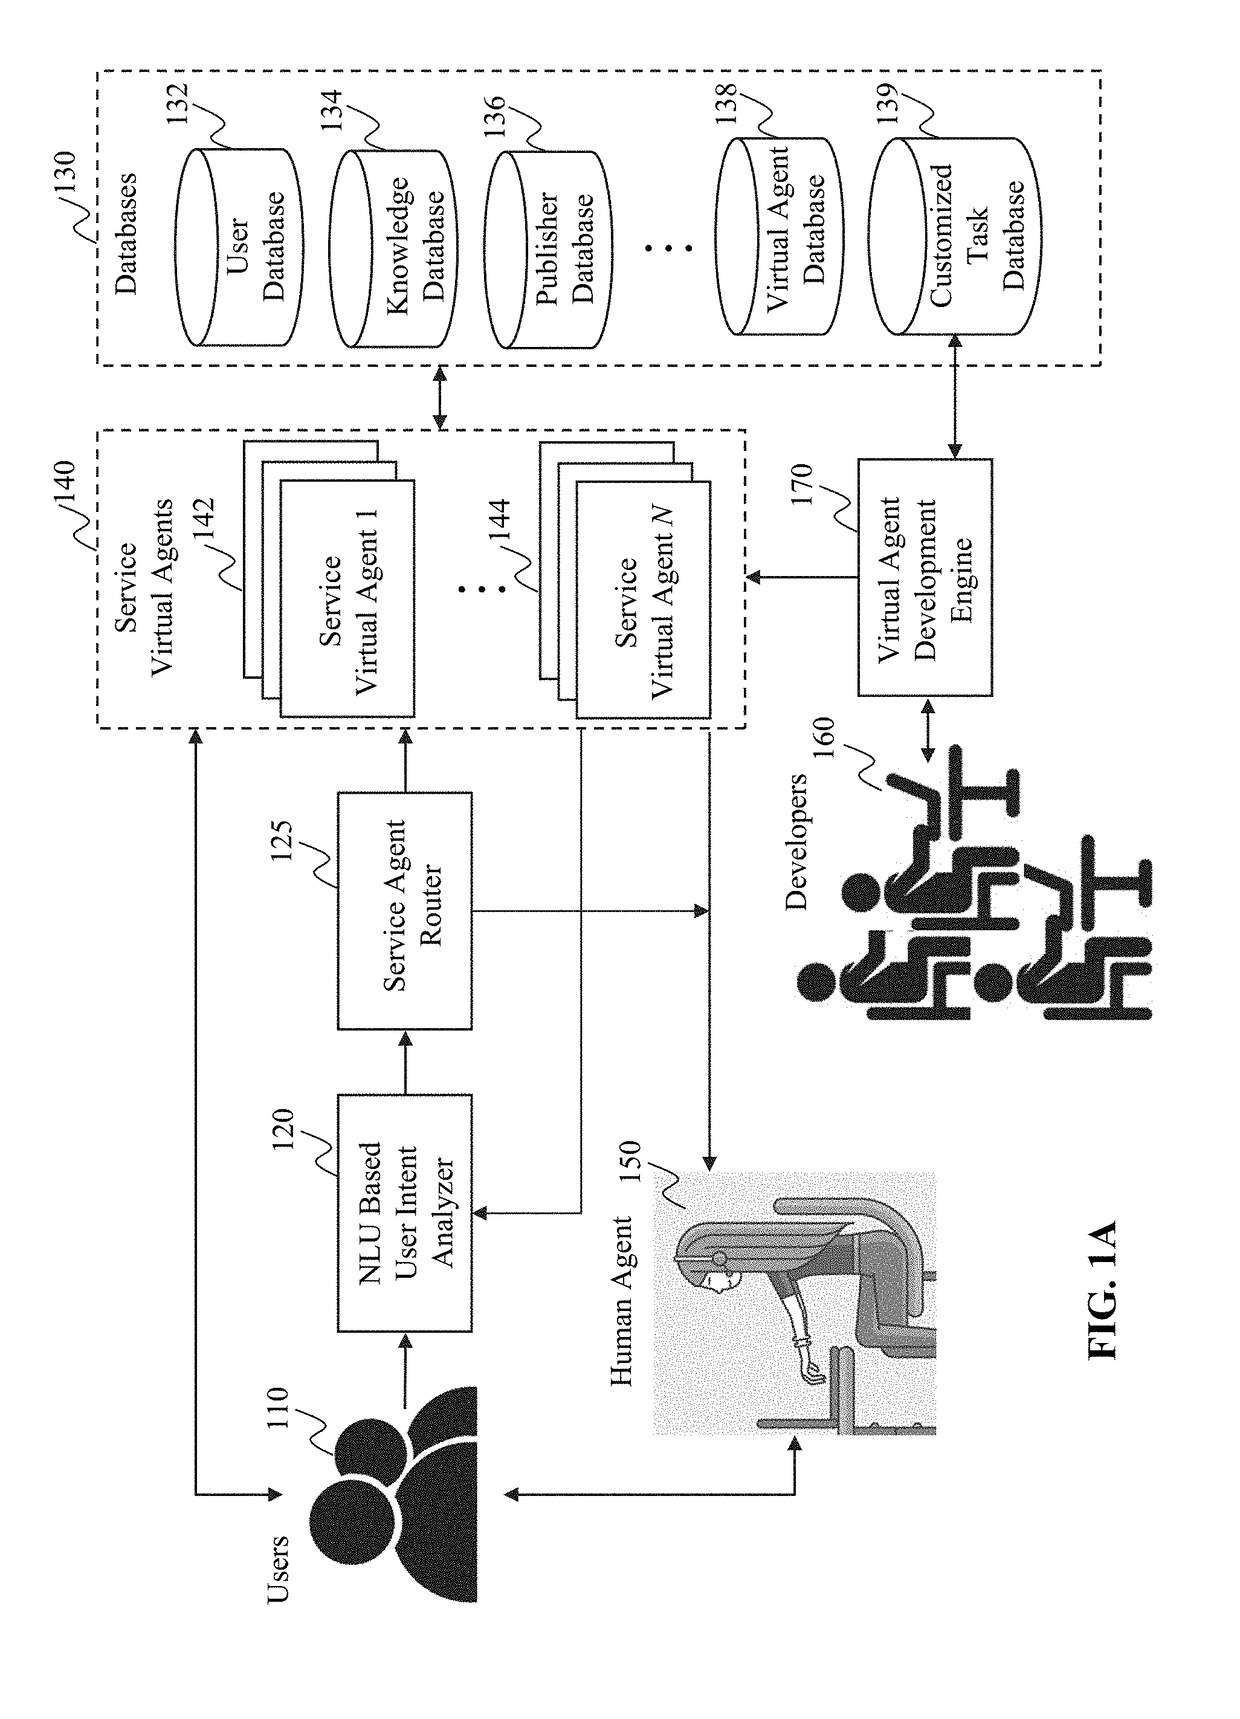 Method and system for context sensitive intelligent virtual agents